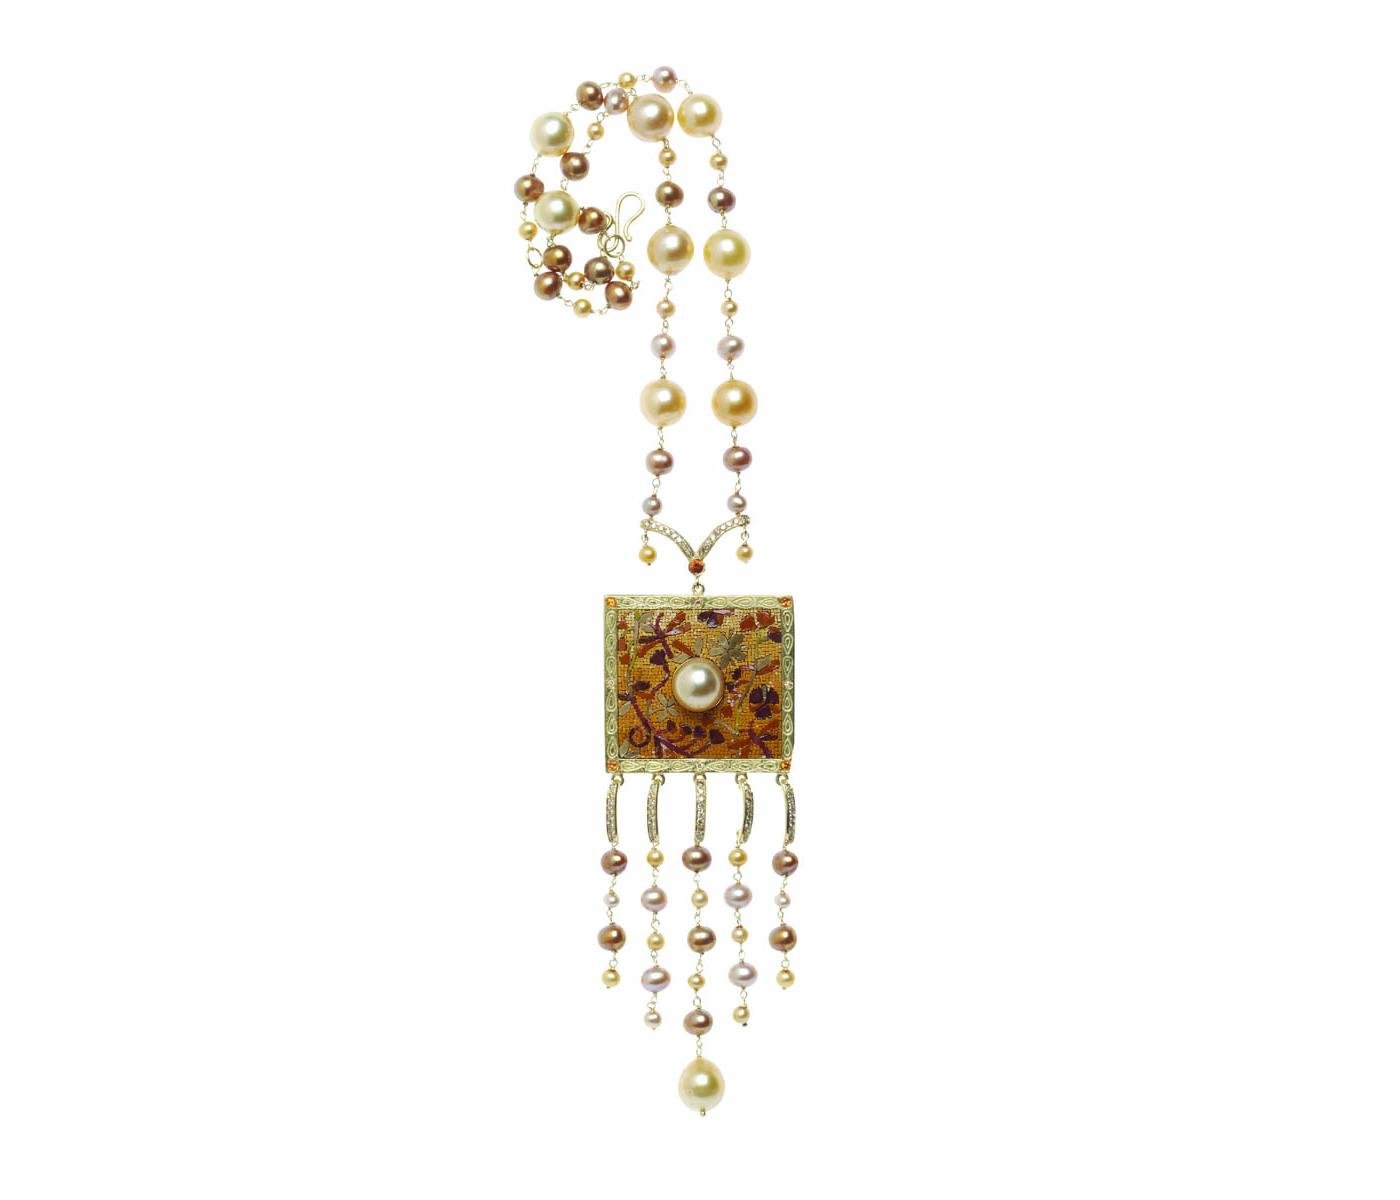 Necklace by Le Sibille